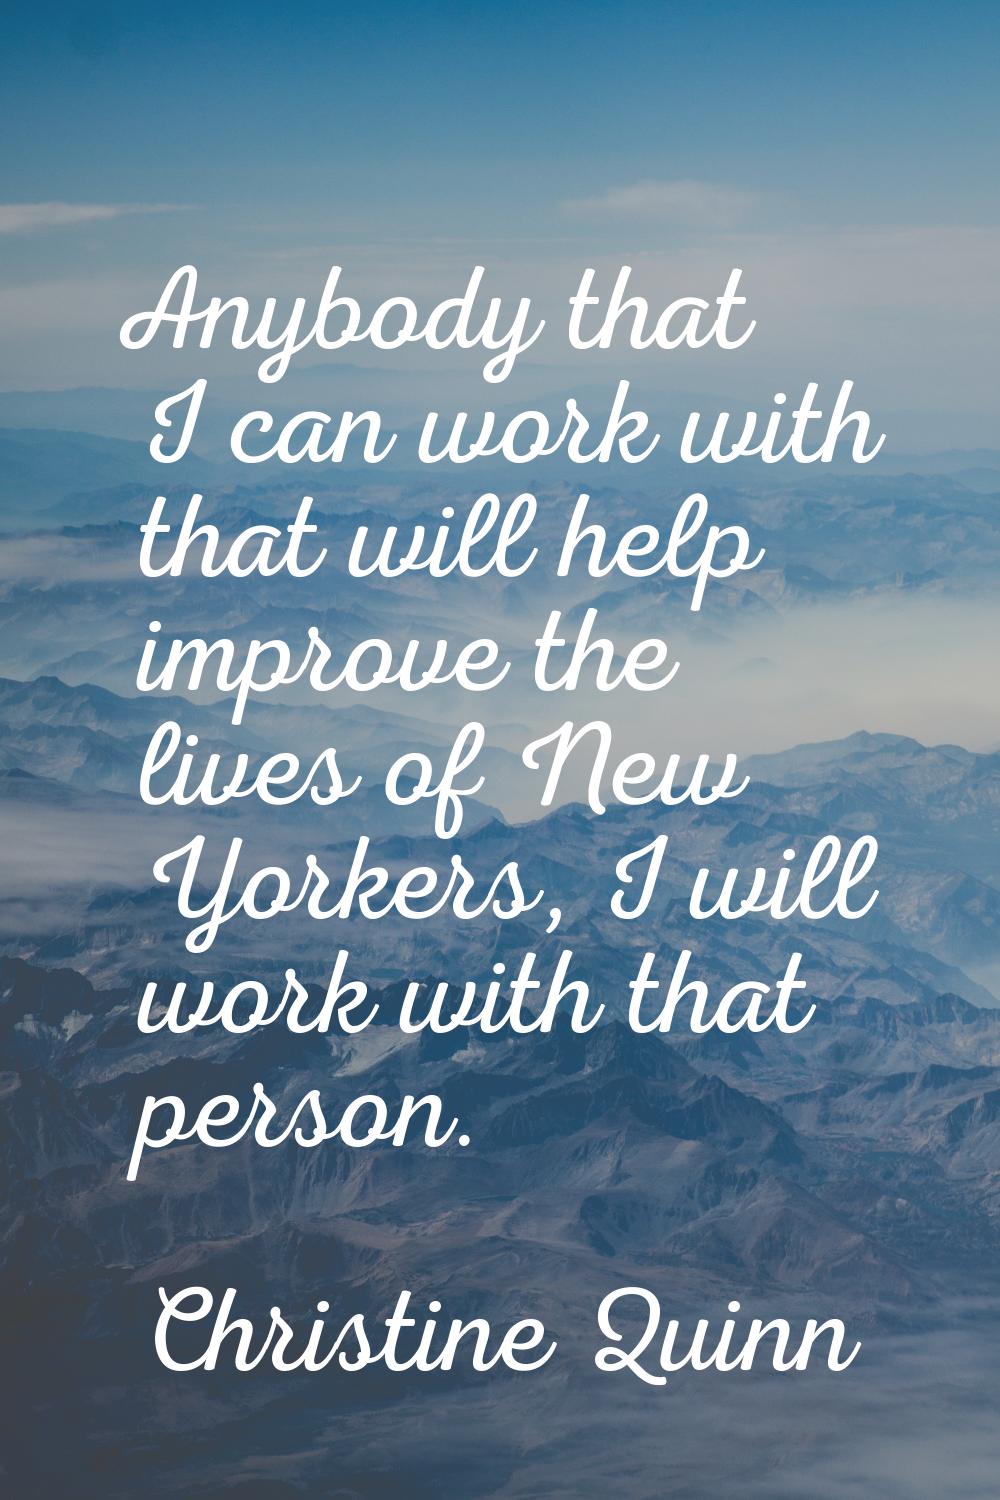 Anybody that I can work with that will help improve the lives of New Yorkers, I will work with that